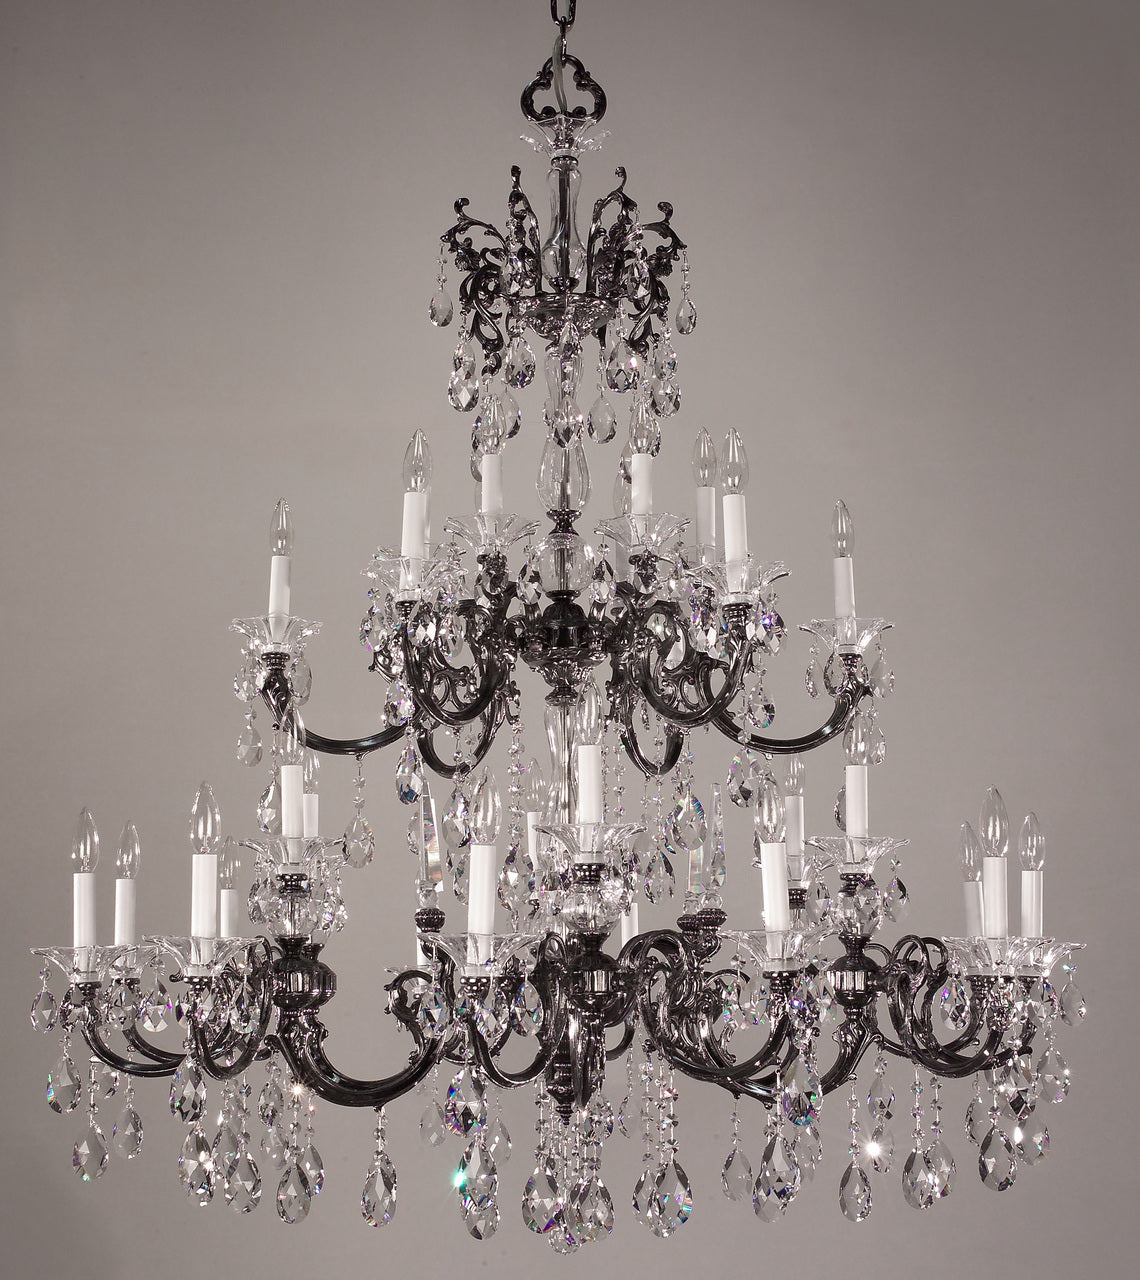 Classic Lighting 57060 G CBK Via Lombardi Crystal Chandelier in 24k Gold (Imported from Spain)